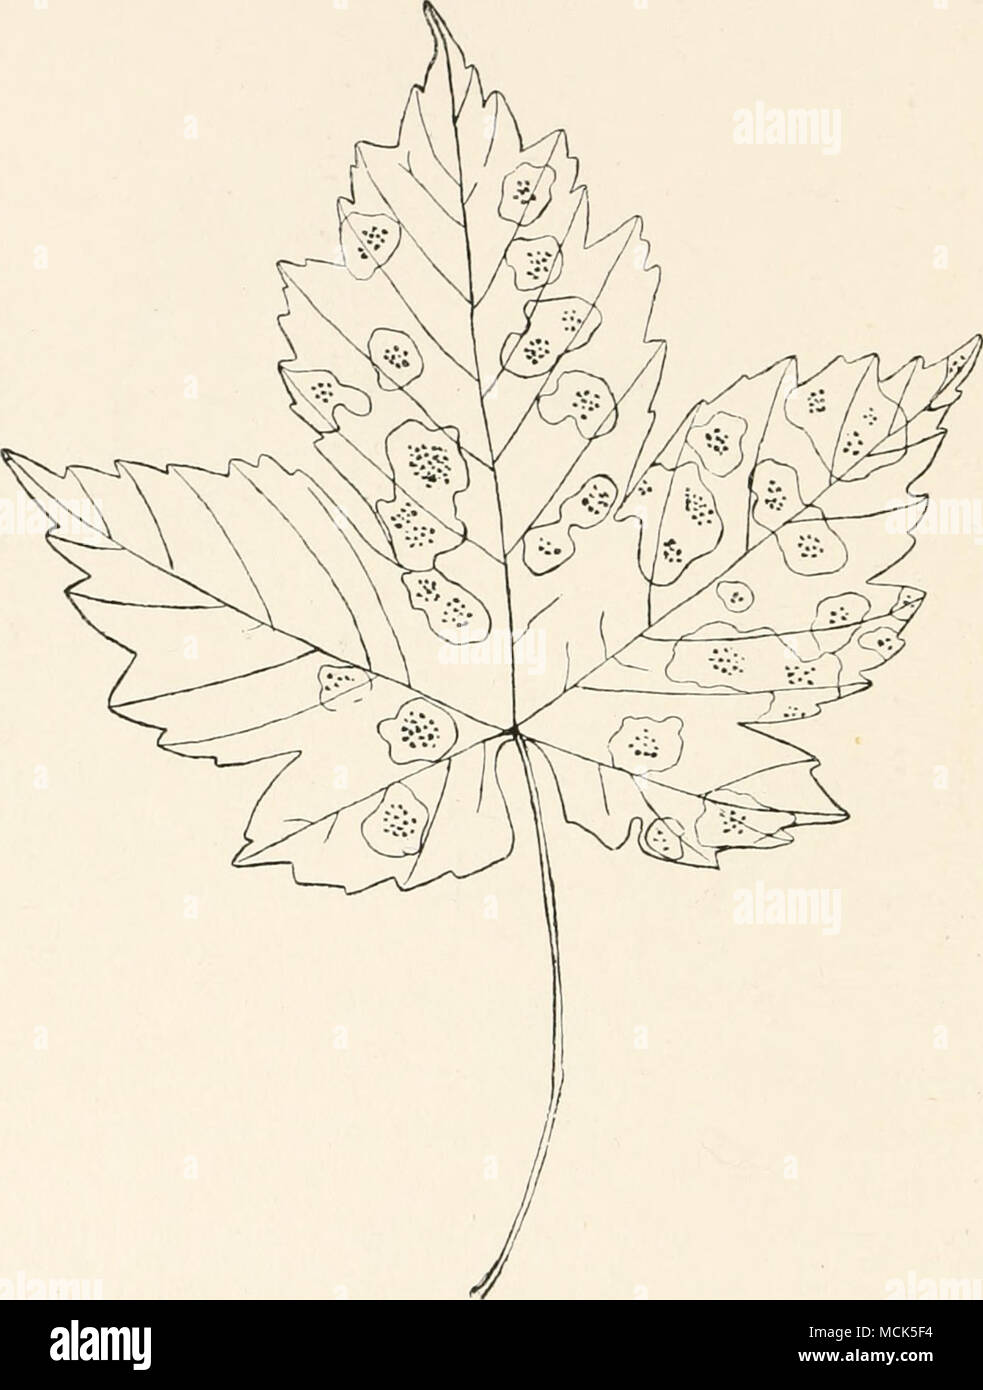 . Fig. 129 —Rhytisma punctatum. Leaf of Acer Pseudo-platanus with apothecia; the leaf is yellow, but the spots enclosing the apothecia are still green, (v. Tubeuf del.) black in colour, angular, and scattered over the whole leaf- surface. After the leaf has turned yellow, portions of it sur- rounding spots of this Rhytisma retain their green colour, so that we have black spots on green islands in the yellow leaf. The sclerotia dehisce by valves. The apothecia contain thread- like paraphyses and asci. The asci are club-shaped and contain Stock Photo